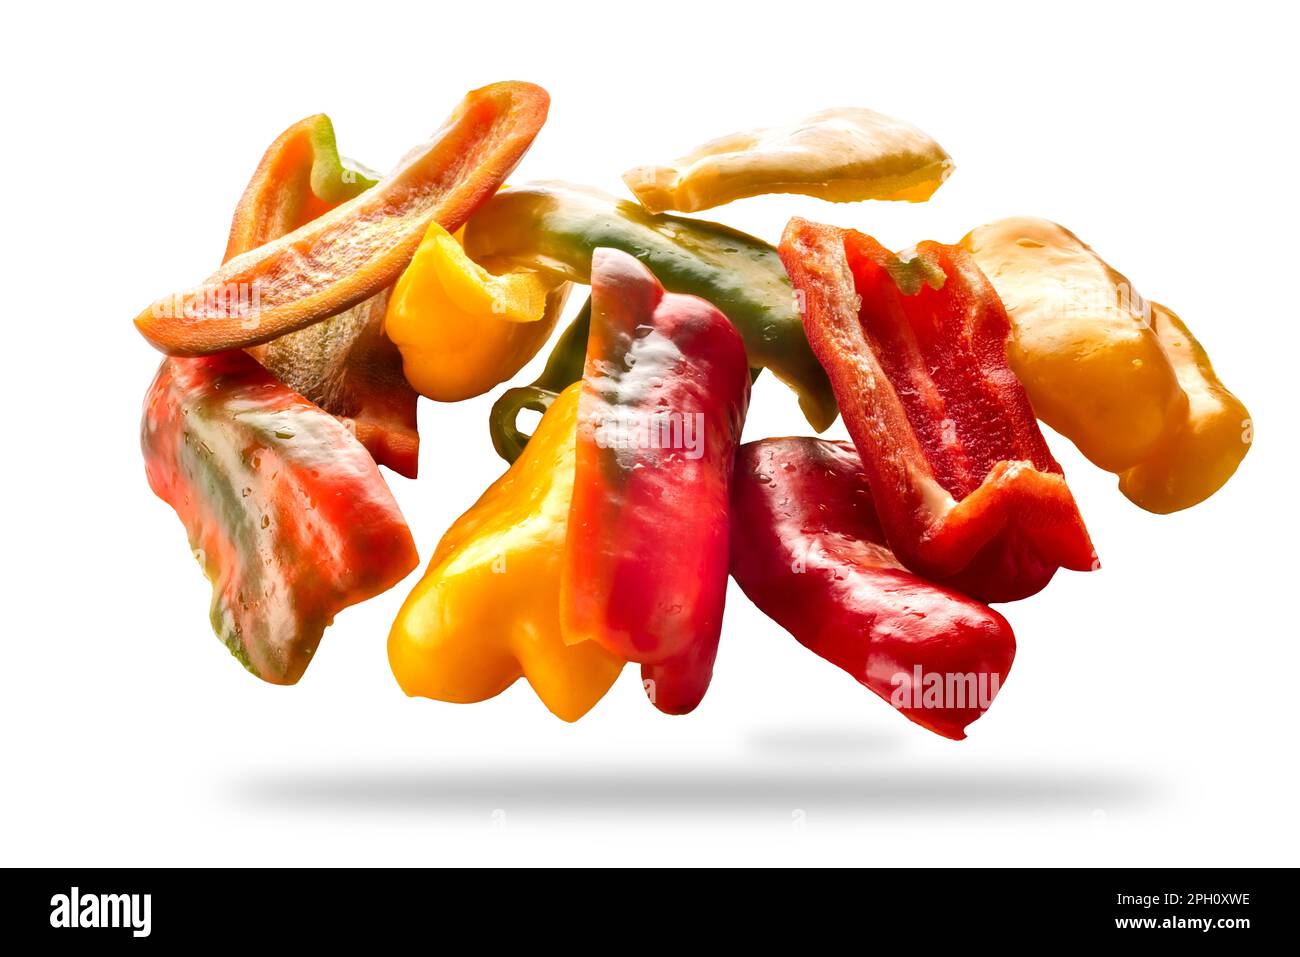 Sliced yellow green and red raw peppers isolated on white with clipping path included Stock Photo